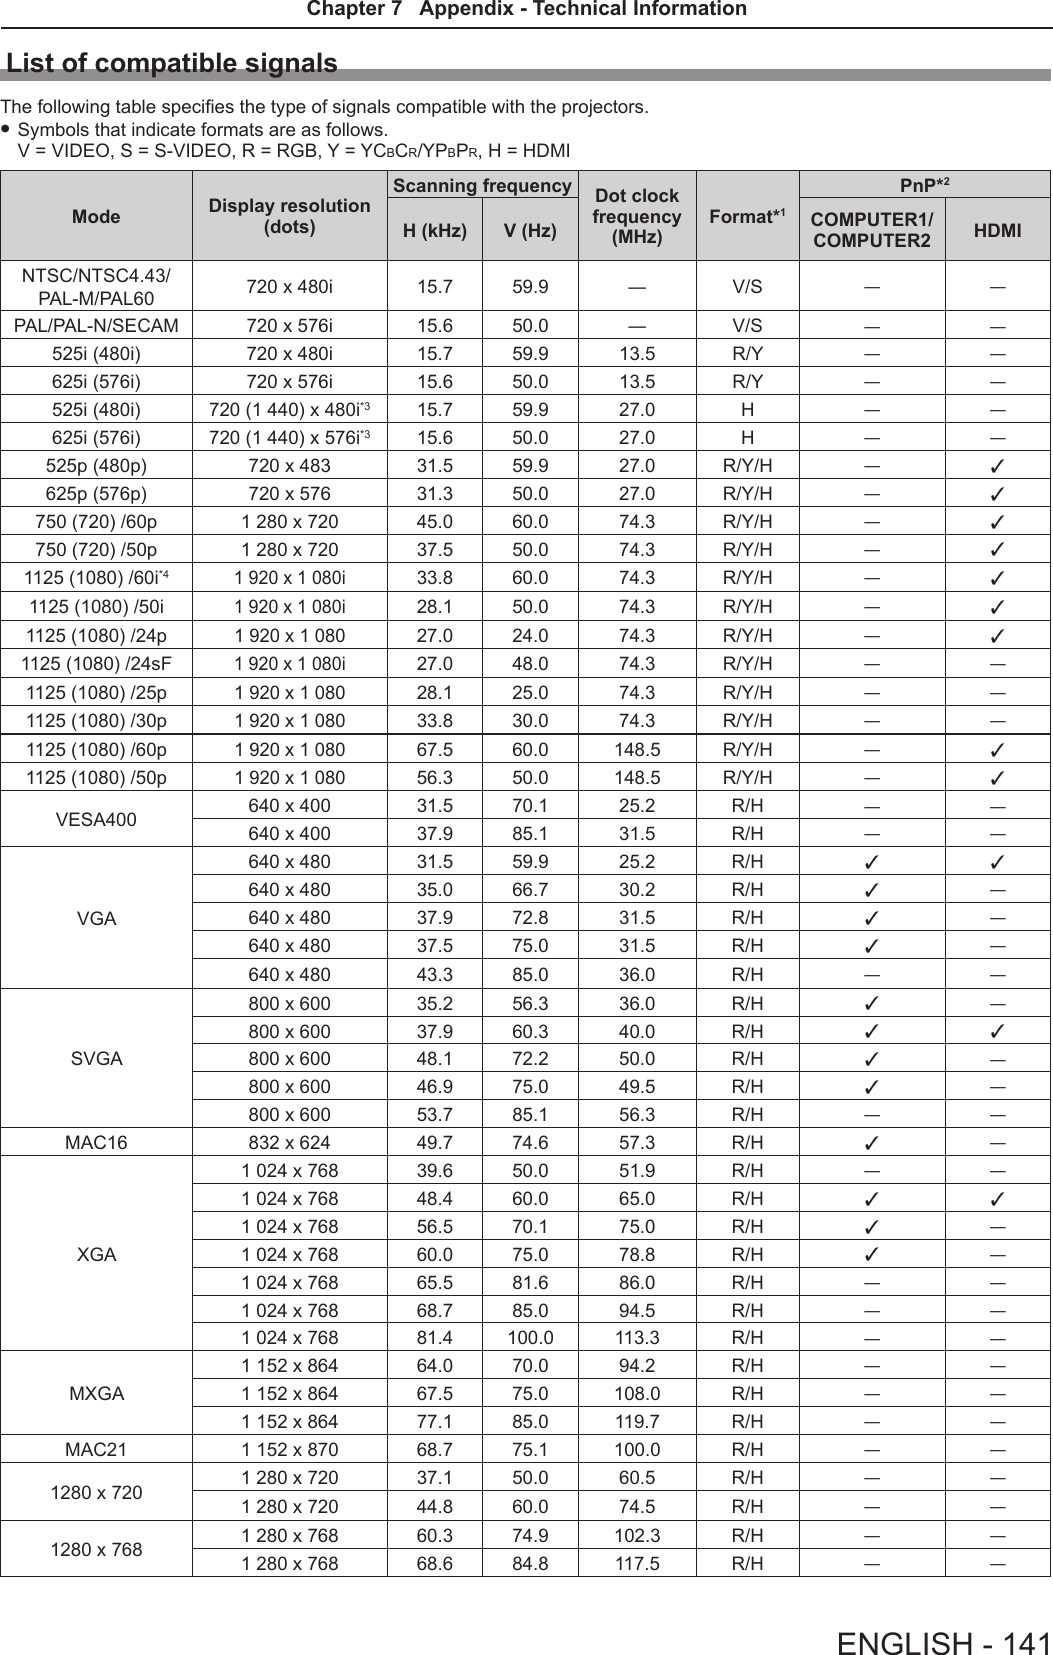 List of compatible signalsThe following table species the type of signals compatible with the projectors. fSymbols that indicate formats are as follows. V = VIDEO, S = S-VIDEO, R = RGB, Y = YCBCR/YPBPR, H = HDMIMode Display resolution(dots)Scanning frequency Dot clock frequency (MHz)Format*1PnP*2H (kHz) V (Hz) COMPUTER1/ COMPUTER2 HDMINTSC/NTSC4.43/PAL-M/PAL60 720 x 480i 15.7 59.9 ― V/S ― ―PAL/PAL-N/SECAM 720 x 576i 15.6 50.0 ― V/S ― ―525i (480i) 720 x 480i 15.7 59.9 13.5 R/Y ― ―625i (576i) 720 x 576i 15.6 50.0 13.5 R/Y ― ―525i (480i) 720 (1 440) x 480i*3 15.7 59.9 27.0 H ― ―625i (576i) 720 (1 440) x 576i*3 15.6 50.0 27.0 H ― ―525p (480p) 720 x 483 31.5 59.9 27.0 R/Y/H ―l625p (576p) 720 x 576 31.3 50.0 27.0 R/Y/H ―l750 (720) /60p 1 280 x 720 45.0 60.0 74.3 R/Y/H ―l750 (720) /50p 1 280 x 720 37.5 50.0 74.3 R/Y/H ―l1125 (1080) /60i*41 920 x 1 080i33.8 60.0 74.3 R/Y/H ―l1125 (1080) /50i1 920 x 1 080i28.1 50.0 74.3 R/Y/H ―l1125 (1080) /24p1 920 x 1 08027.0 24.0 74.3 R/Y/H ―l1125 (1080) /24sF1 920 x 1 080i27.0 48.0 74.3 R/Y/H ― ―1125 (1080) /25p1 920 x 1 08028.1 25.0 74.3 R/Y/H ― ―1125 (1080) /30p1 920 x 1 08033.8 30.0 74.3 R/Y/H ― ―1125 (1080) /60p1 920 x 1 08067.5 60.0 148.5 R/Y/H ―l1125 (1080) /50p1 920 x 1 08056.3 50.0 148.5 R/Y/H ―lVESA400 640 x 400 31.5 70.1 25.2 R/H ― ―640 x 400 37.9 85.1 31.5 R/H ― ―VGA640 x 480 31.5 59.9 25.2 R/H l l640 x 480 35.0 66.7 30.2 R/H l―640 x 480 37.9 72.8 31.5 R/H l―640 x 480 37.5 75.0 31.5 R/H l―640 x 480 43.3 85.0 36.0 R/H ― ―SVGA800 x 600 35.2 56.3 36.0 R/H l―800 x 600 37.9 60.3 40.0 R/H l l800 x 600 48.1 72.2 50.0 R/H l―800 x 600 46.9 75.0 49.5 R/H l―800 x 600 53.7 85.1 56.3 R/H ― ―MAC16 832 x 624 49.7 74.6 57.3 R/H l―XGA1 024 x 768 39.6 50.0 51.9 R/H ― ―1 024 x 768 48.4 60.0 65.0 R/H l l1 024 x 768 56.5 70.1 75.0 R/H l―1 024 x 768 60.0 75.0 78.8 R/H l―1 024 x 768 65.5 81.6 86.0 R/H ― ―1 024 x 768 68.7 85.0 94.5 R/H ― ―1 024 x 768 81.4 100.0 113.3 R/H ― ―MXGA1 152 x 864 64.0 70.0 94.2 R/H ― ―1 152 x 864 67.5 75.0 108.0 R/H ― ―1 152 x 864 77.1 85.0 119.7 R/H ― ―MAC21 1 152 x 870 68.7 75.1 100.0 R/H ― ―1280 x 720 1 280 x 720 37.1 50.0 60.5 R/H ― ―1 280 x 720 44.8 60.0 74.5 R/H ― ―1280 x 768 1 280 x 768 60.3 74.9 102.3 R/H ― ―1 280 x 768 68.6 84.8 117.5 R/H ― ―ENGLISH - 141Chapter 7   Appendix - Technical Information